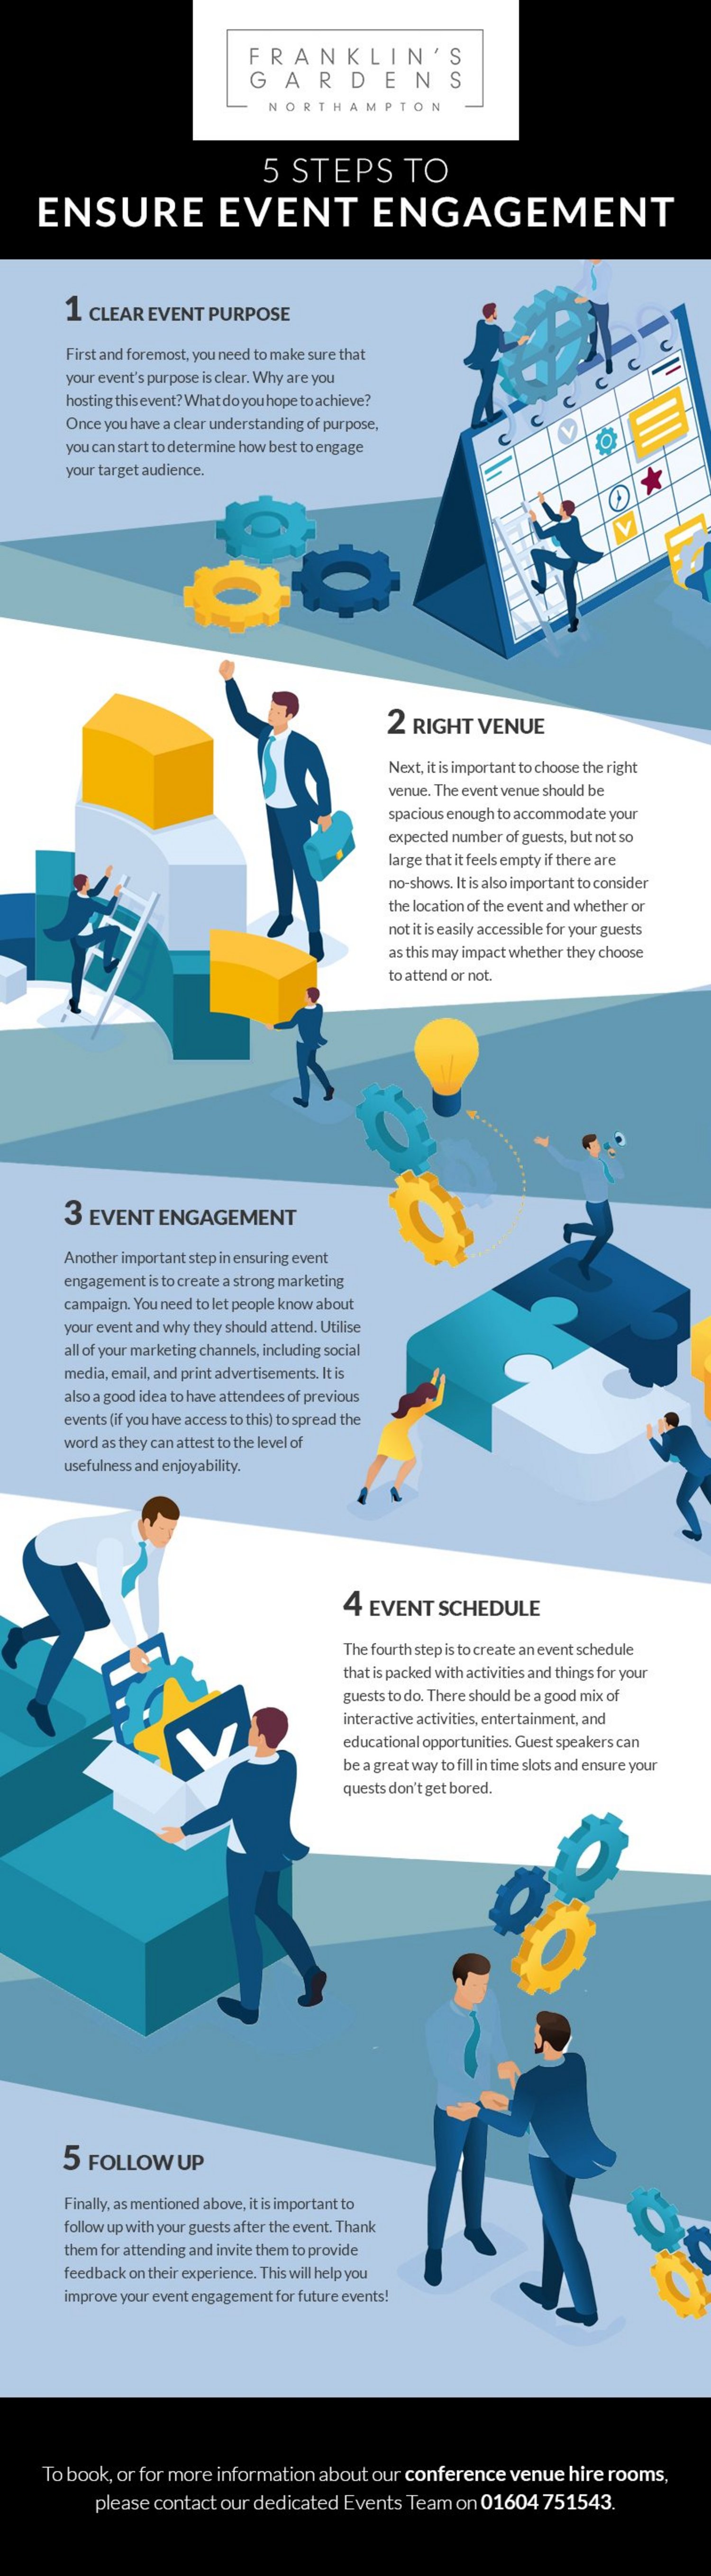 5 Ways To Ensure Event Engagement | Event Planning Tips